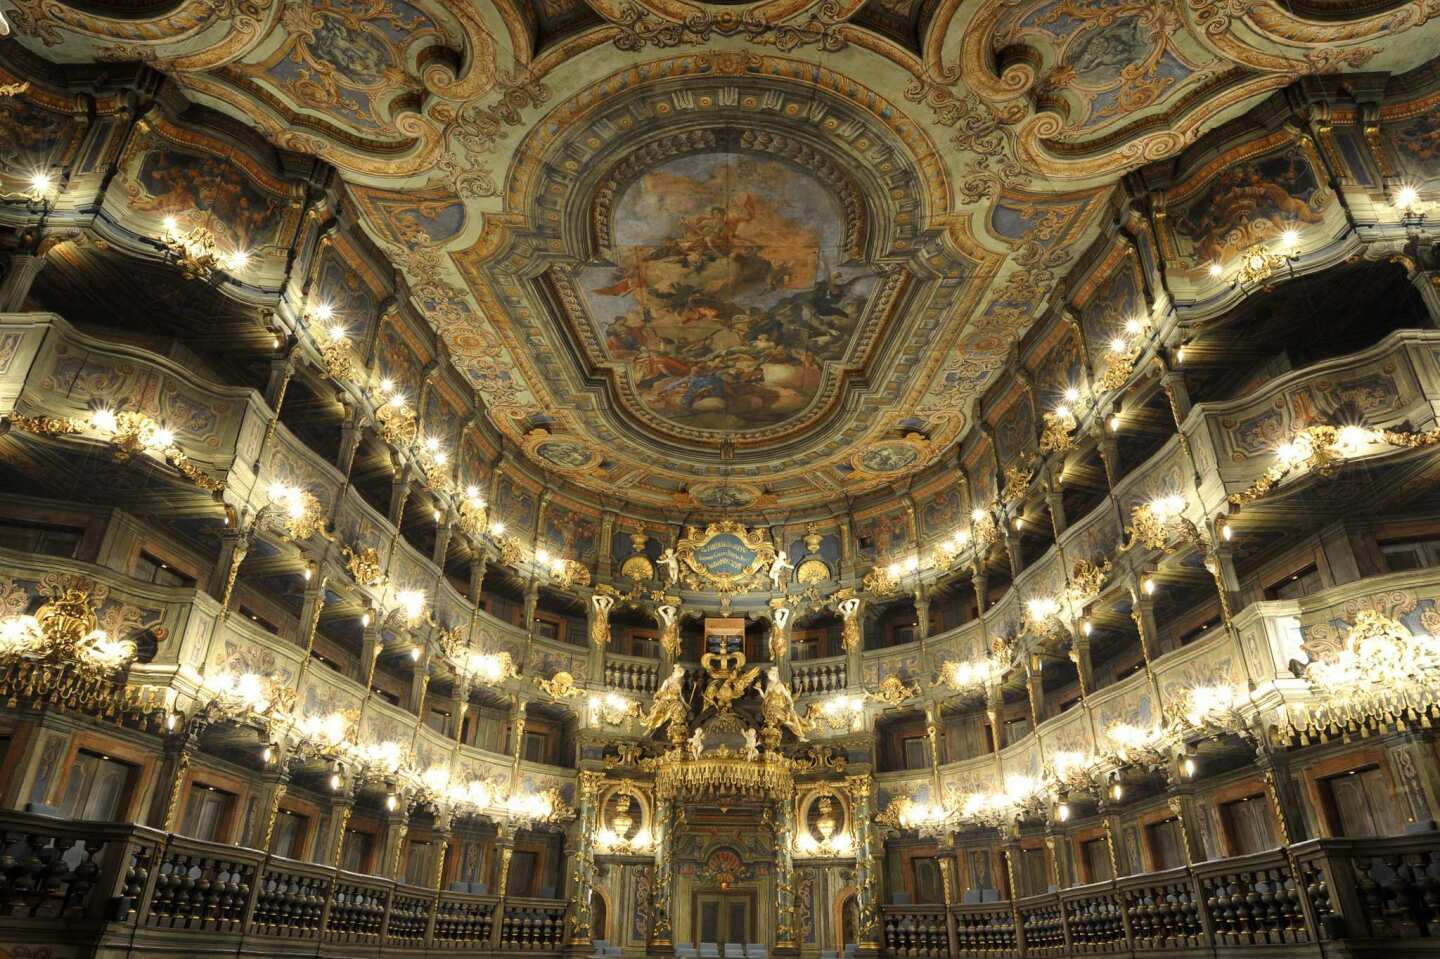 Margravial Opera House, Bayreuth, Germany